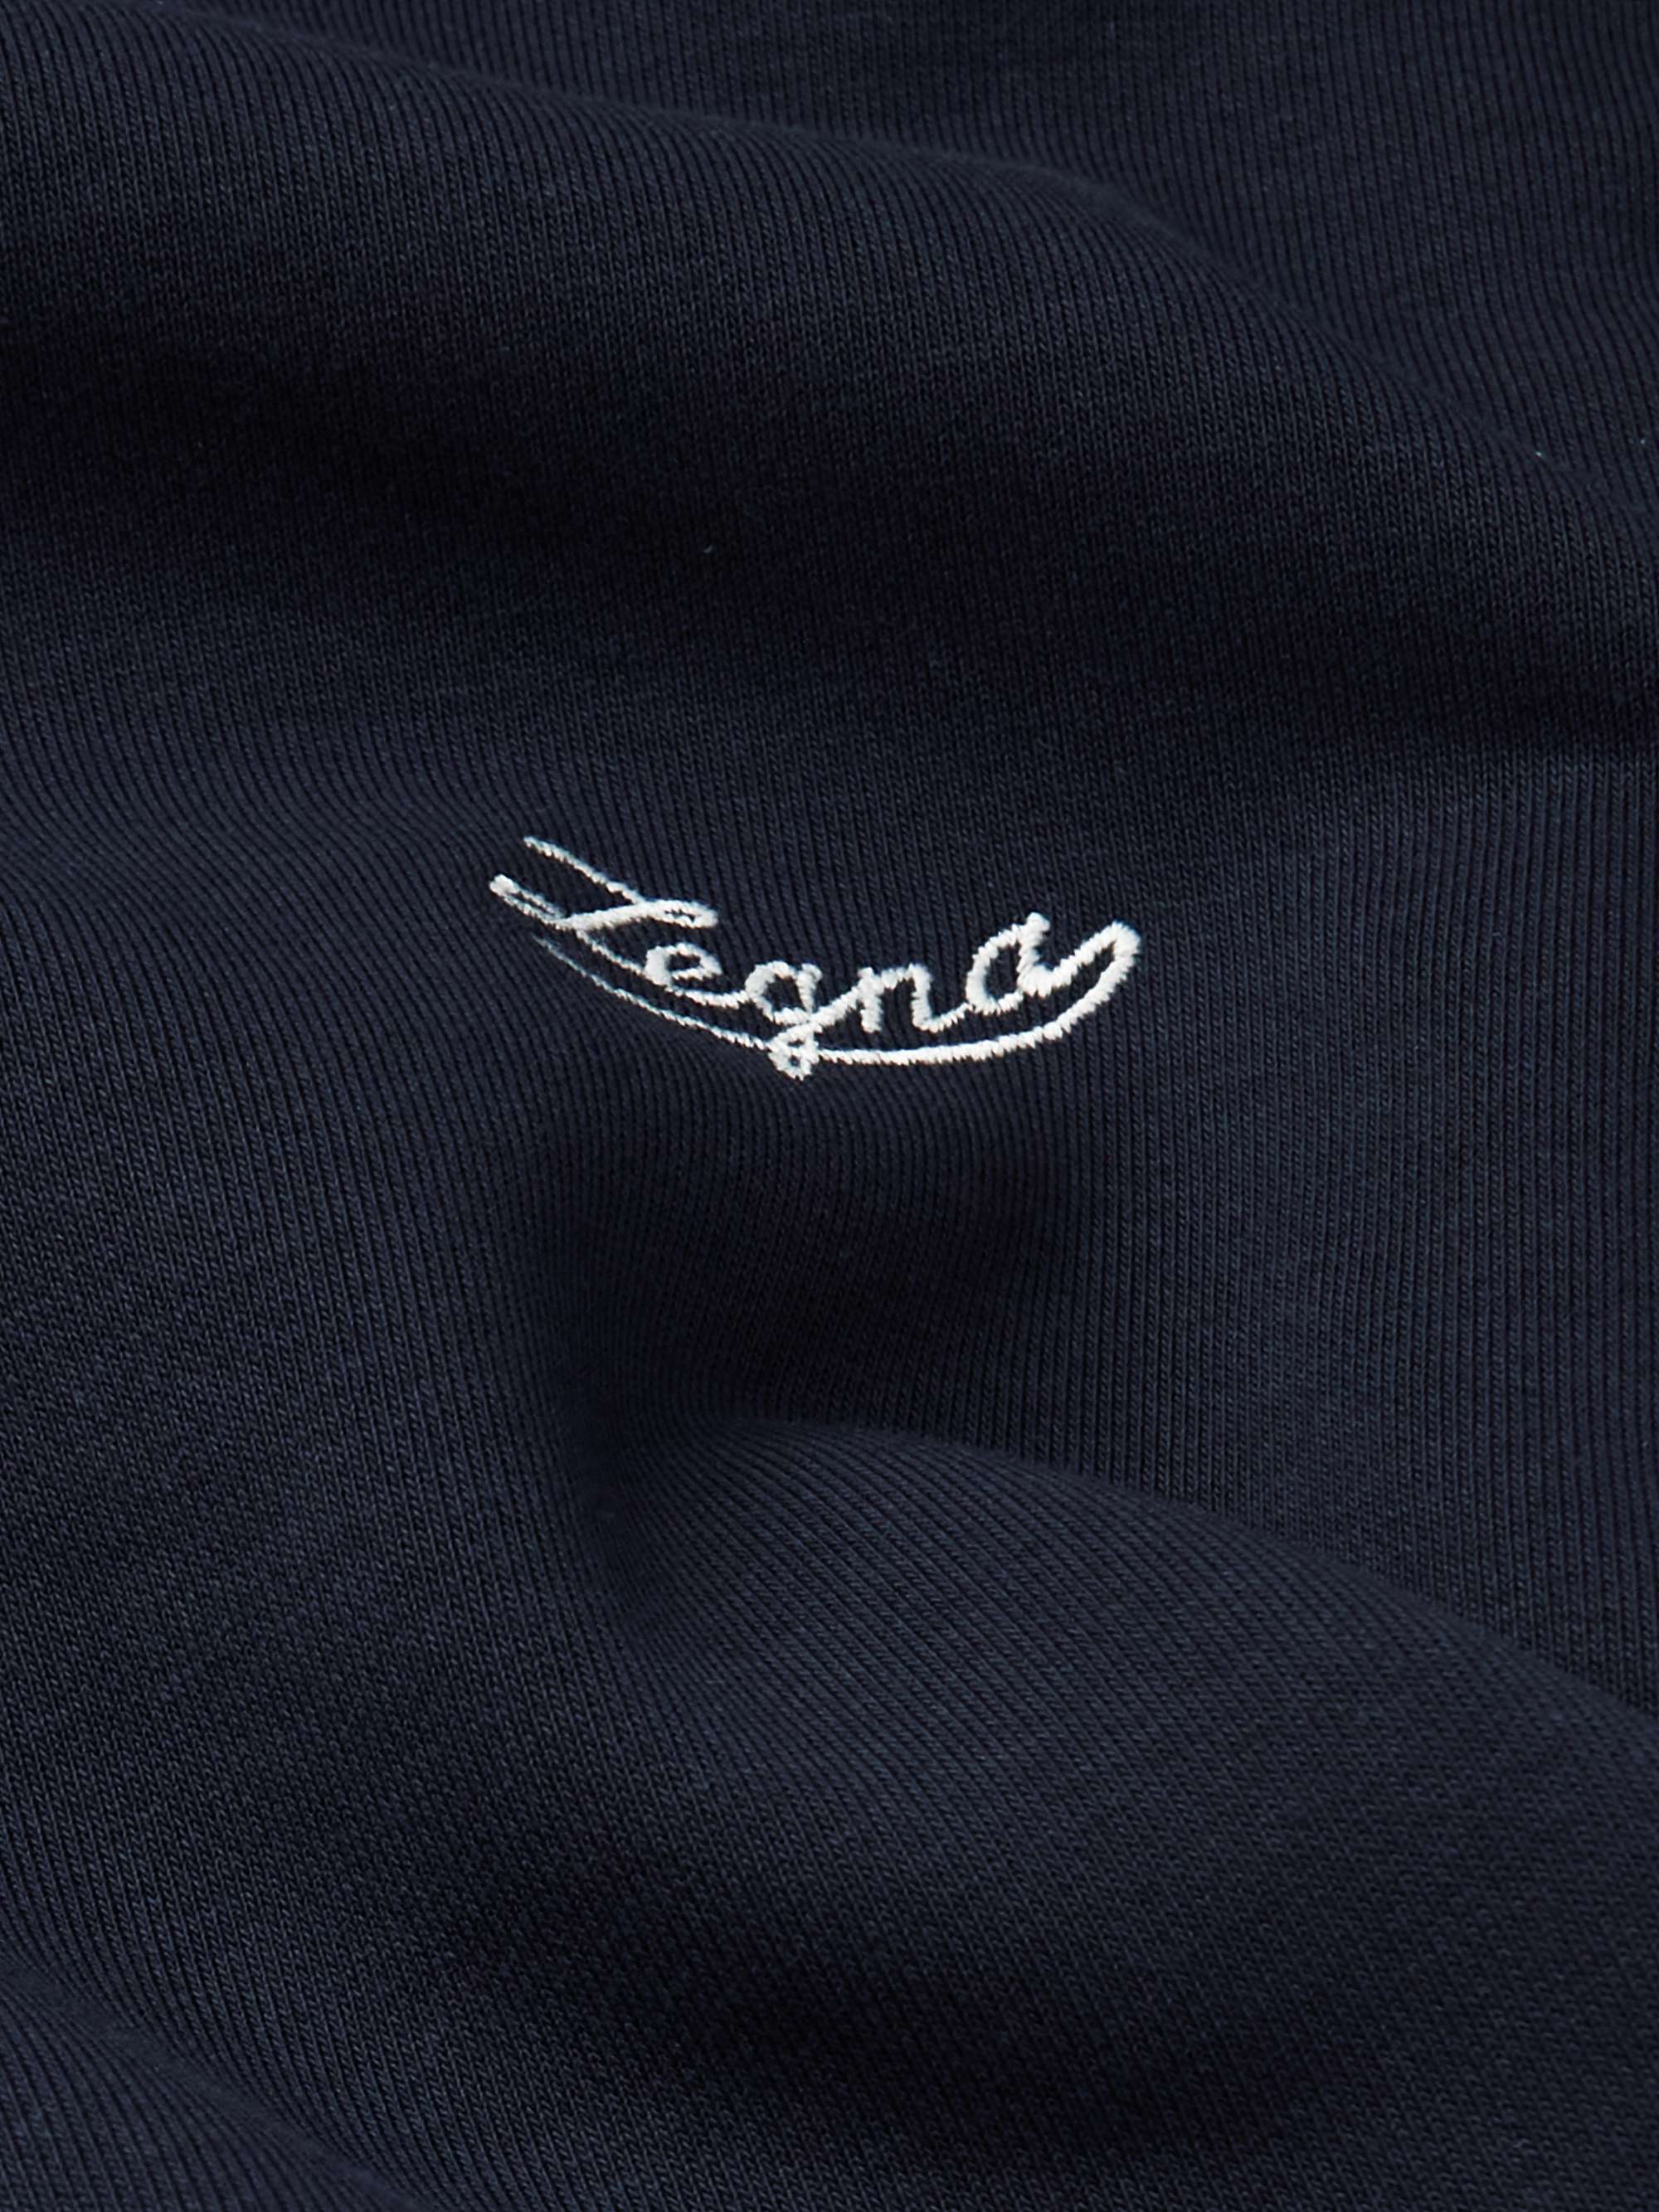 ZEGNA Logo-Embroidered Cotton-Blend Jersey Sweatshirt and Track Pants Set